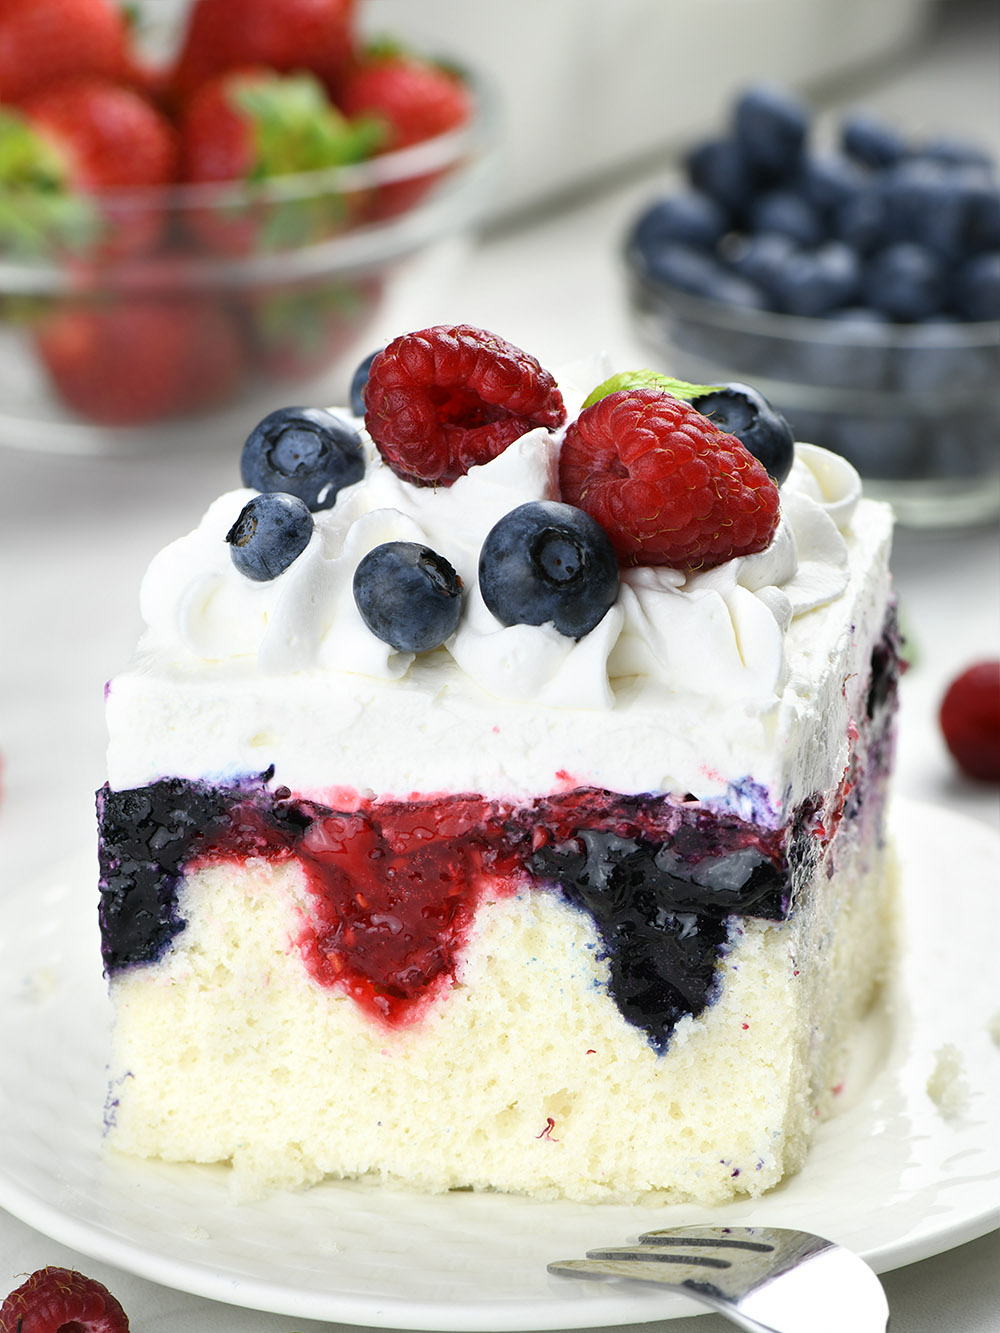 Summer berry poke cake on a white plate, garnished with berries and topped with cool whip.